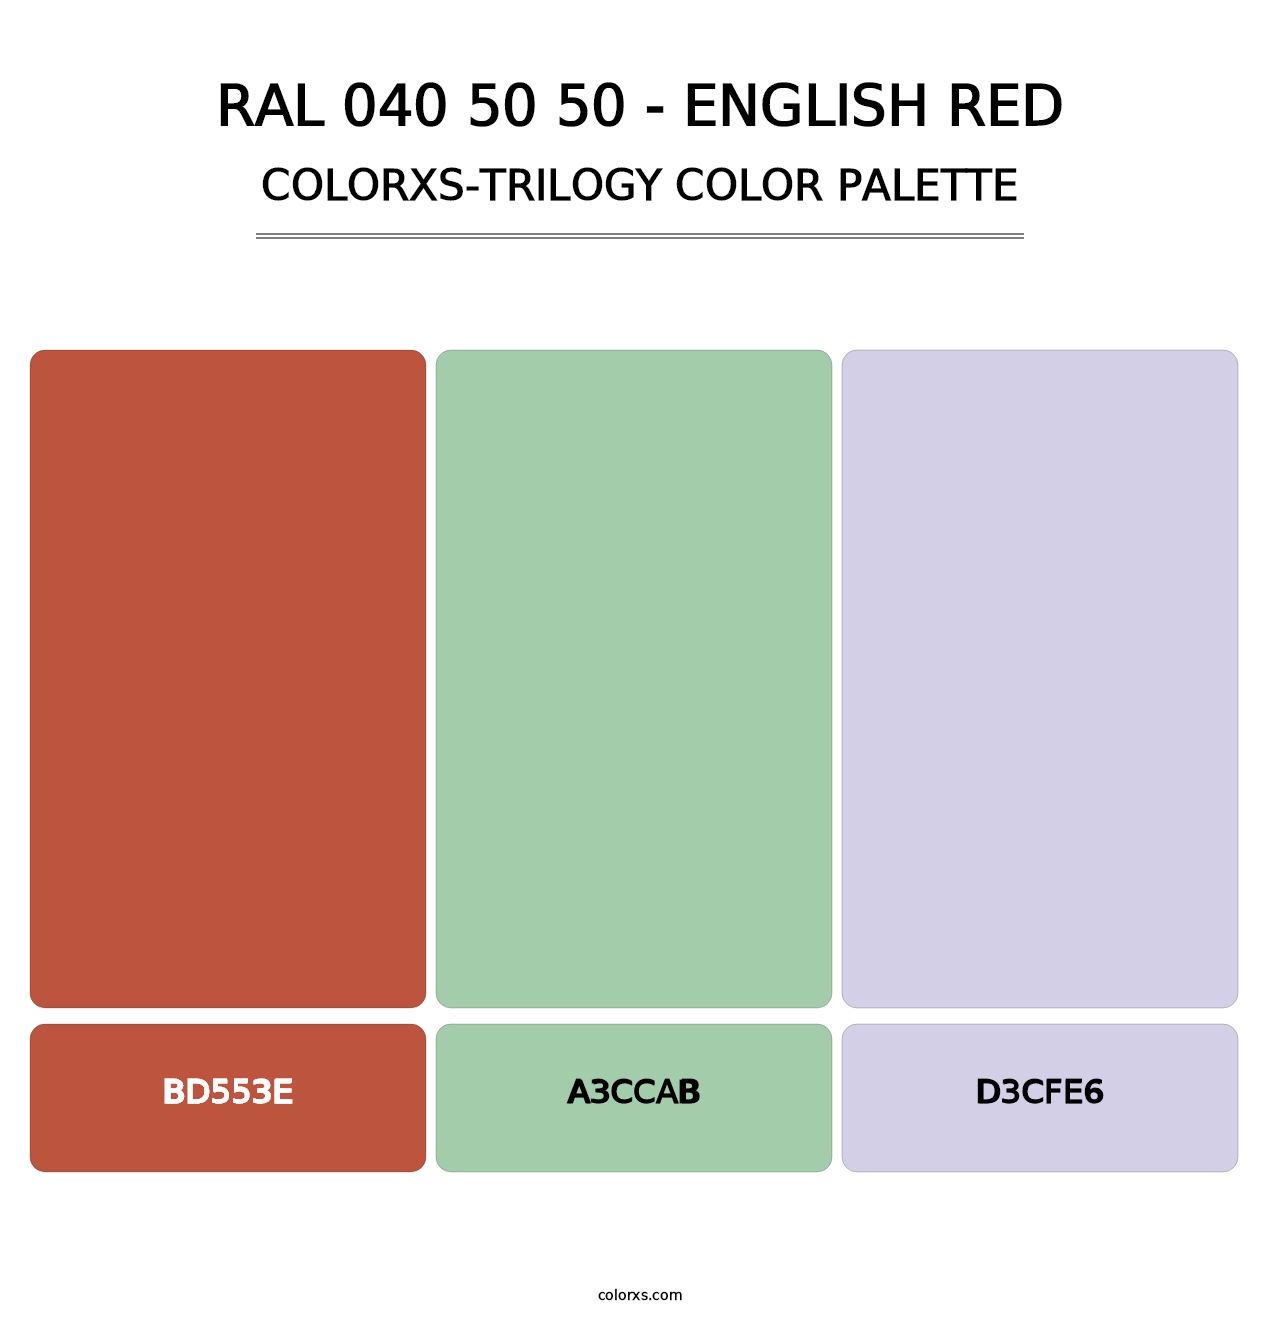 RAL 040 50 50 - English Red - Colorxs Trilogy Palette